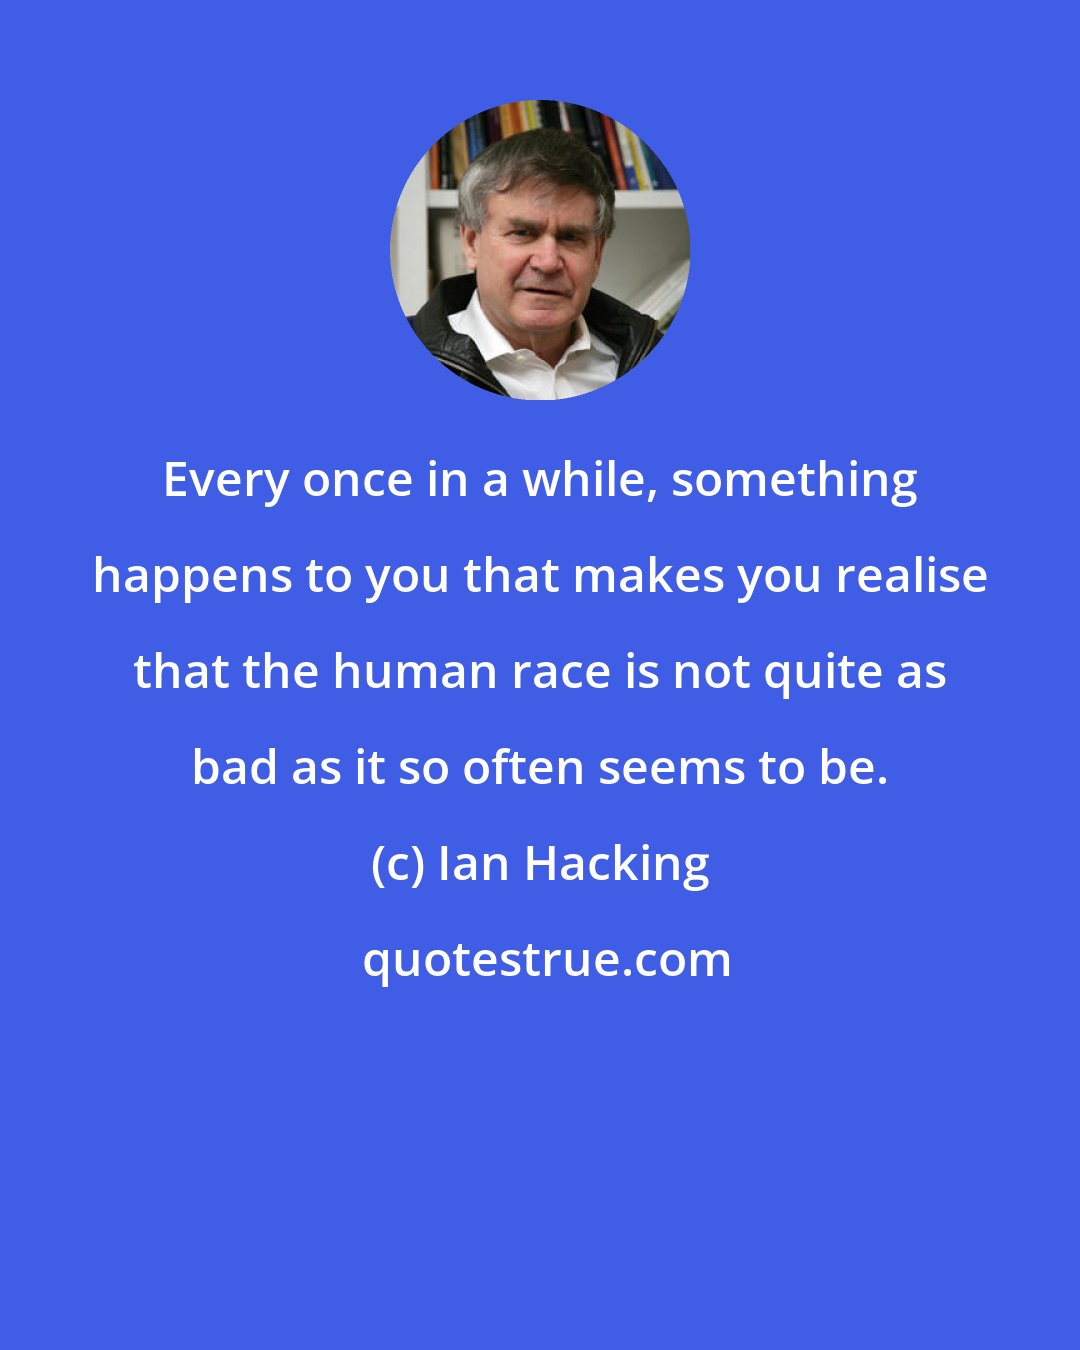 Ian Hacking: Every once in a while, something happens to you that makes you realise that the human race is not quite as bad as it so often seems to be.